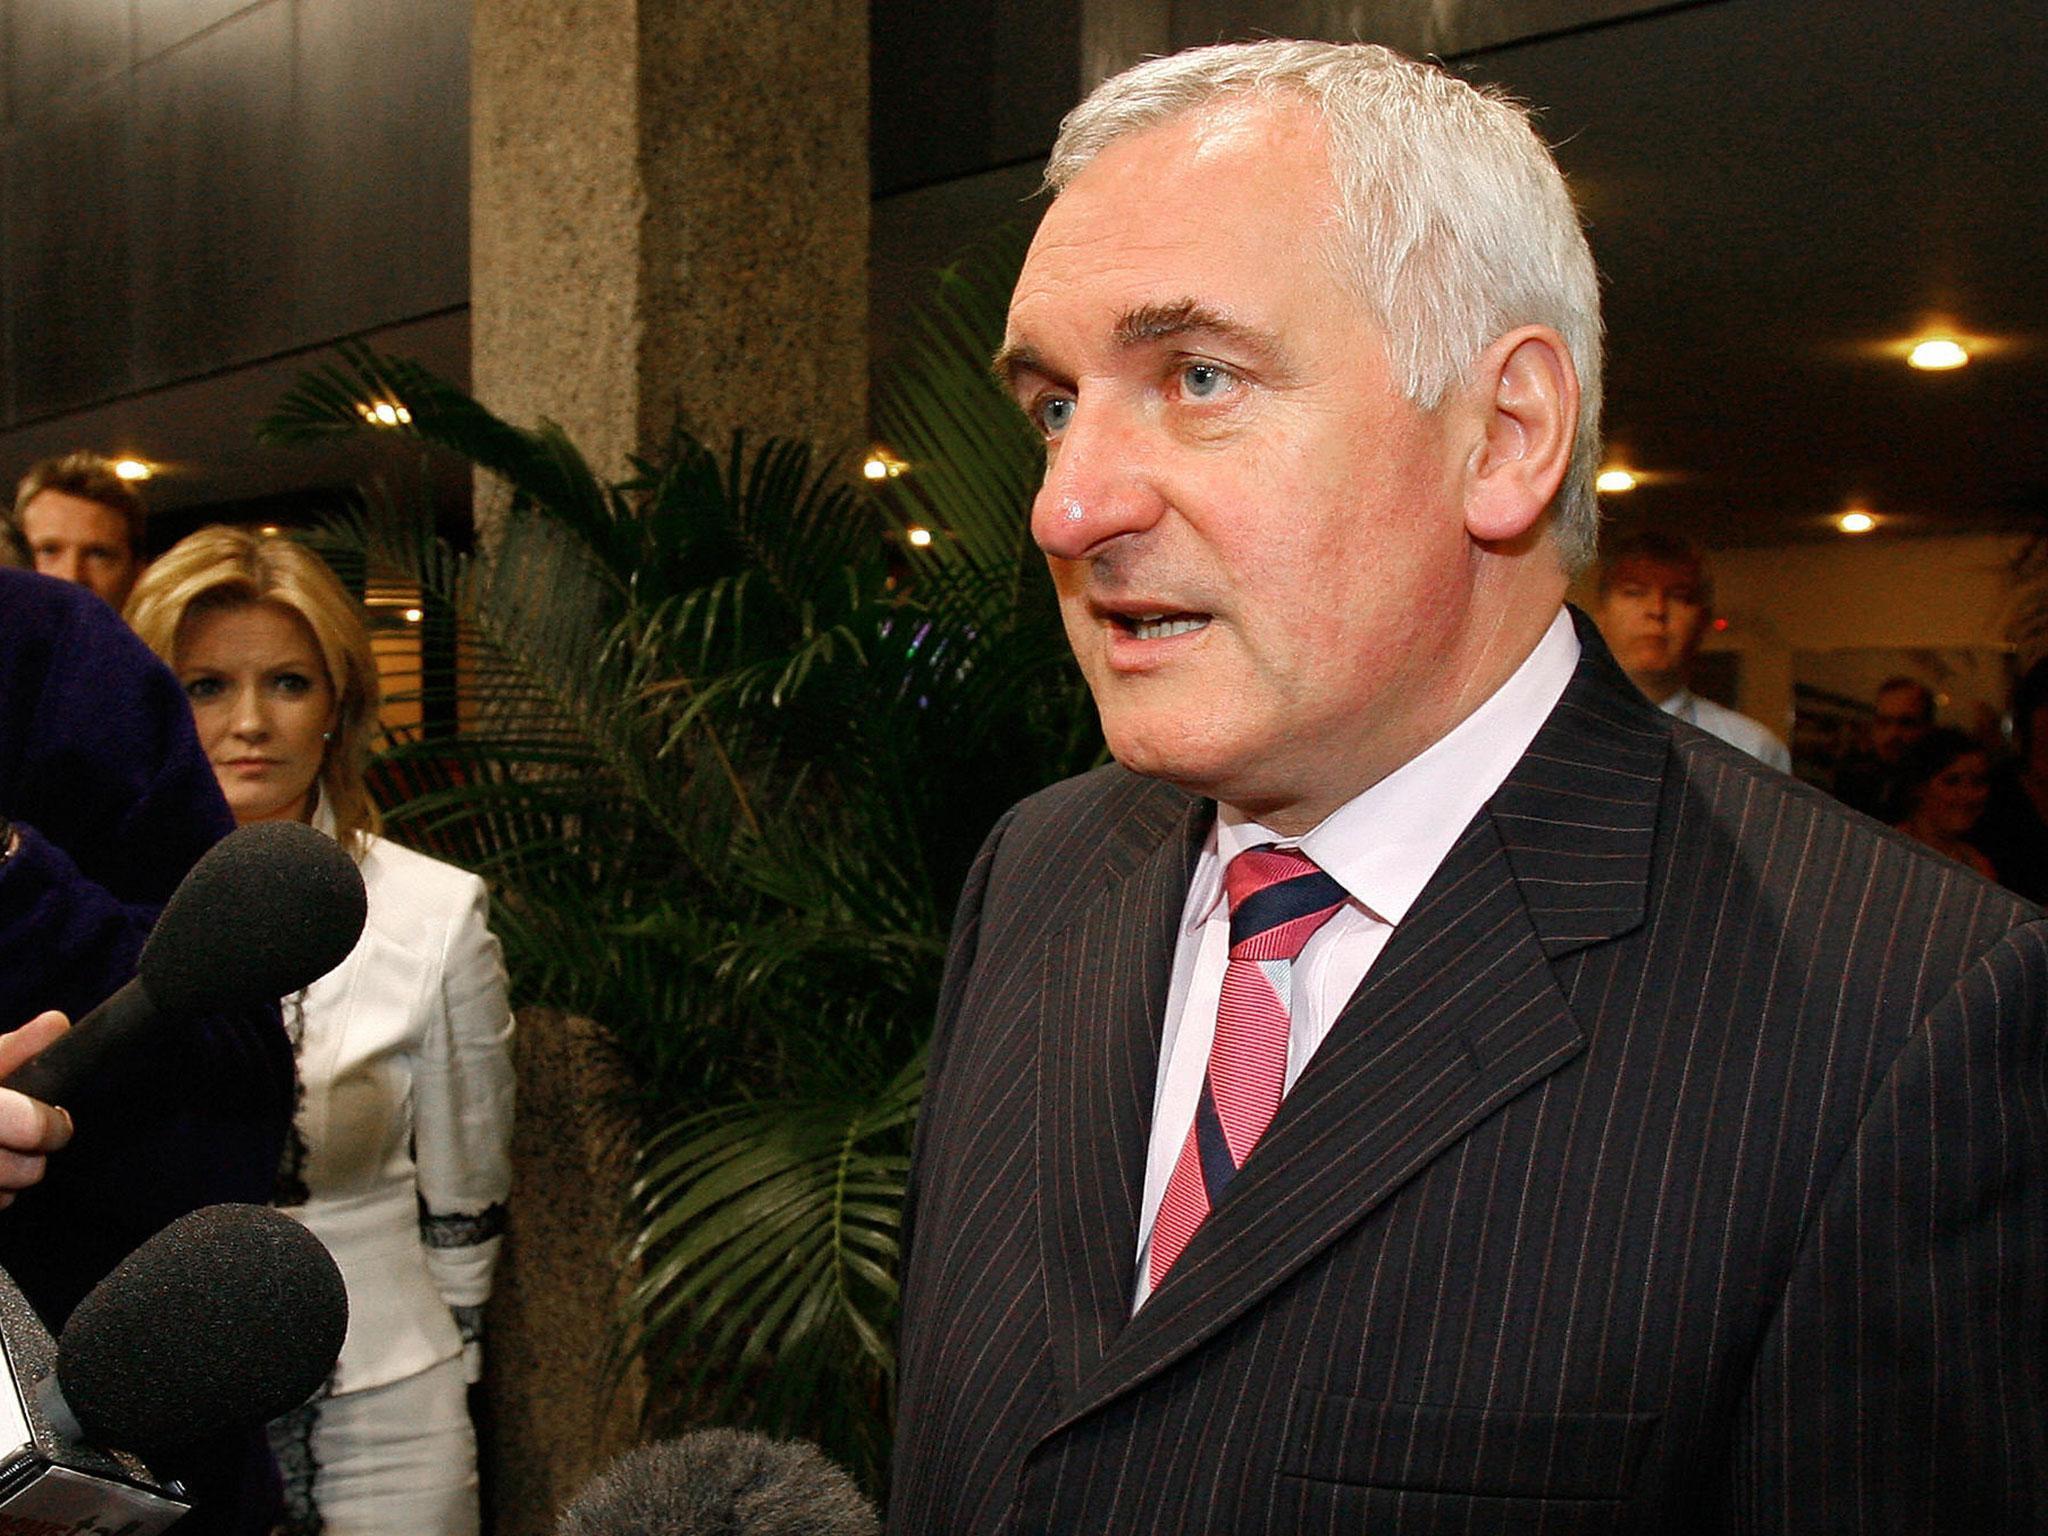 Bertie Ahern said the UK should have decided its plans for a future relationship with the EU